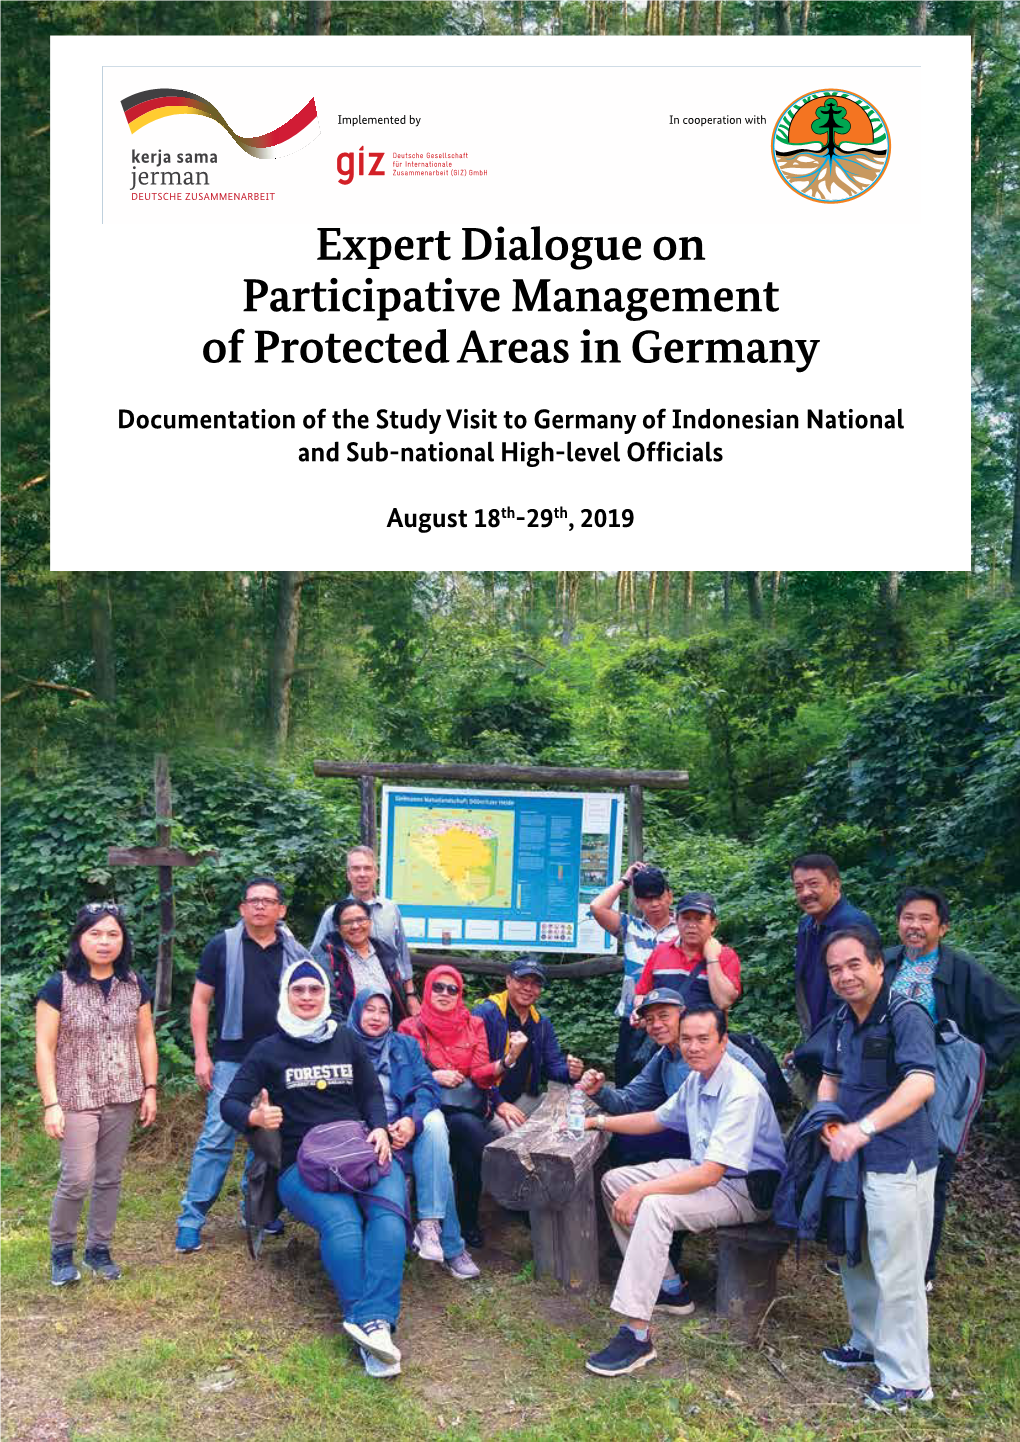 Expert Dialogue on Participative Management of Protected Areas in Germany